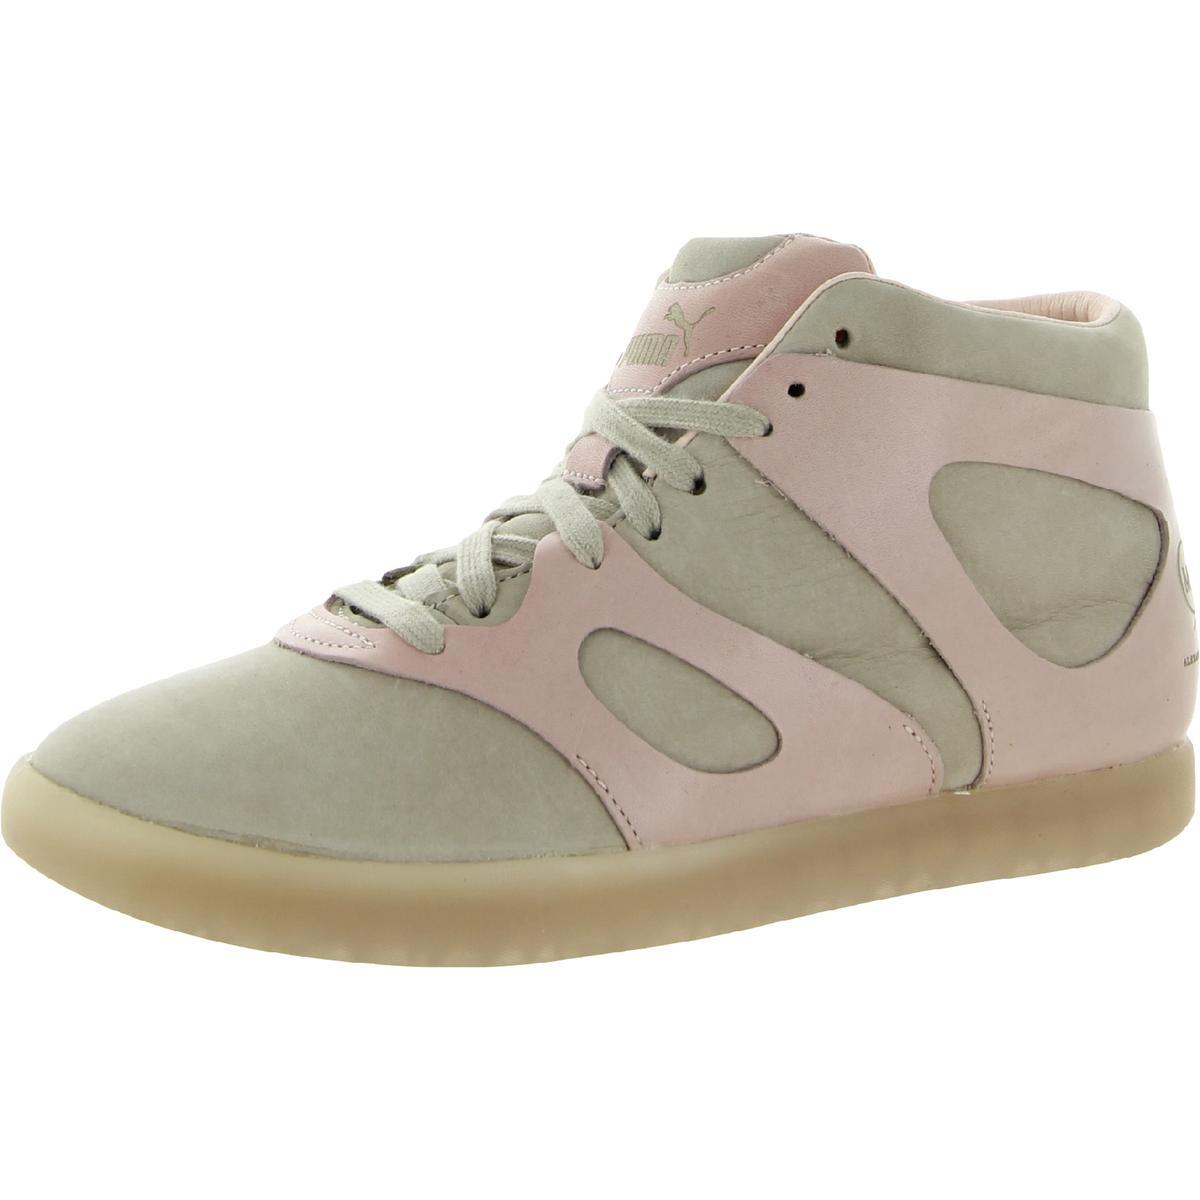 Puma Womens Mcqueen Climb Leather Casual and Fashion Sneakers Shoes Bhfo 2503 Veiled Rose